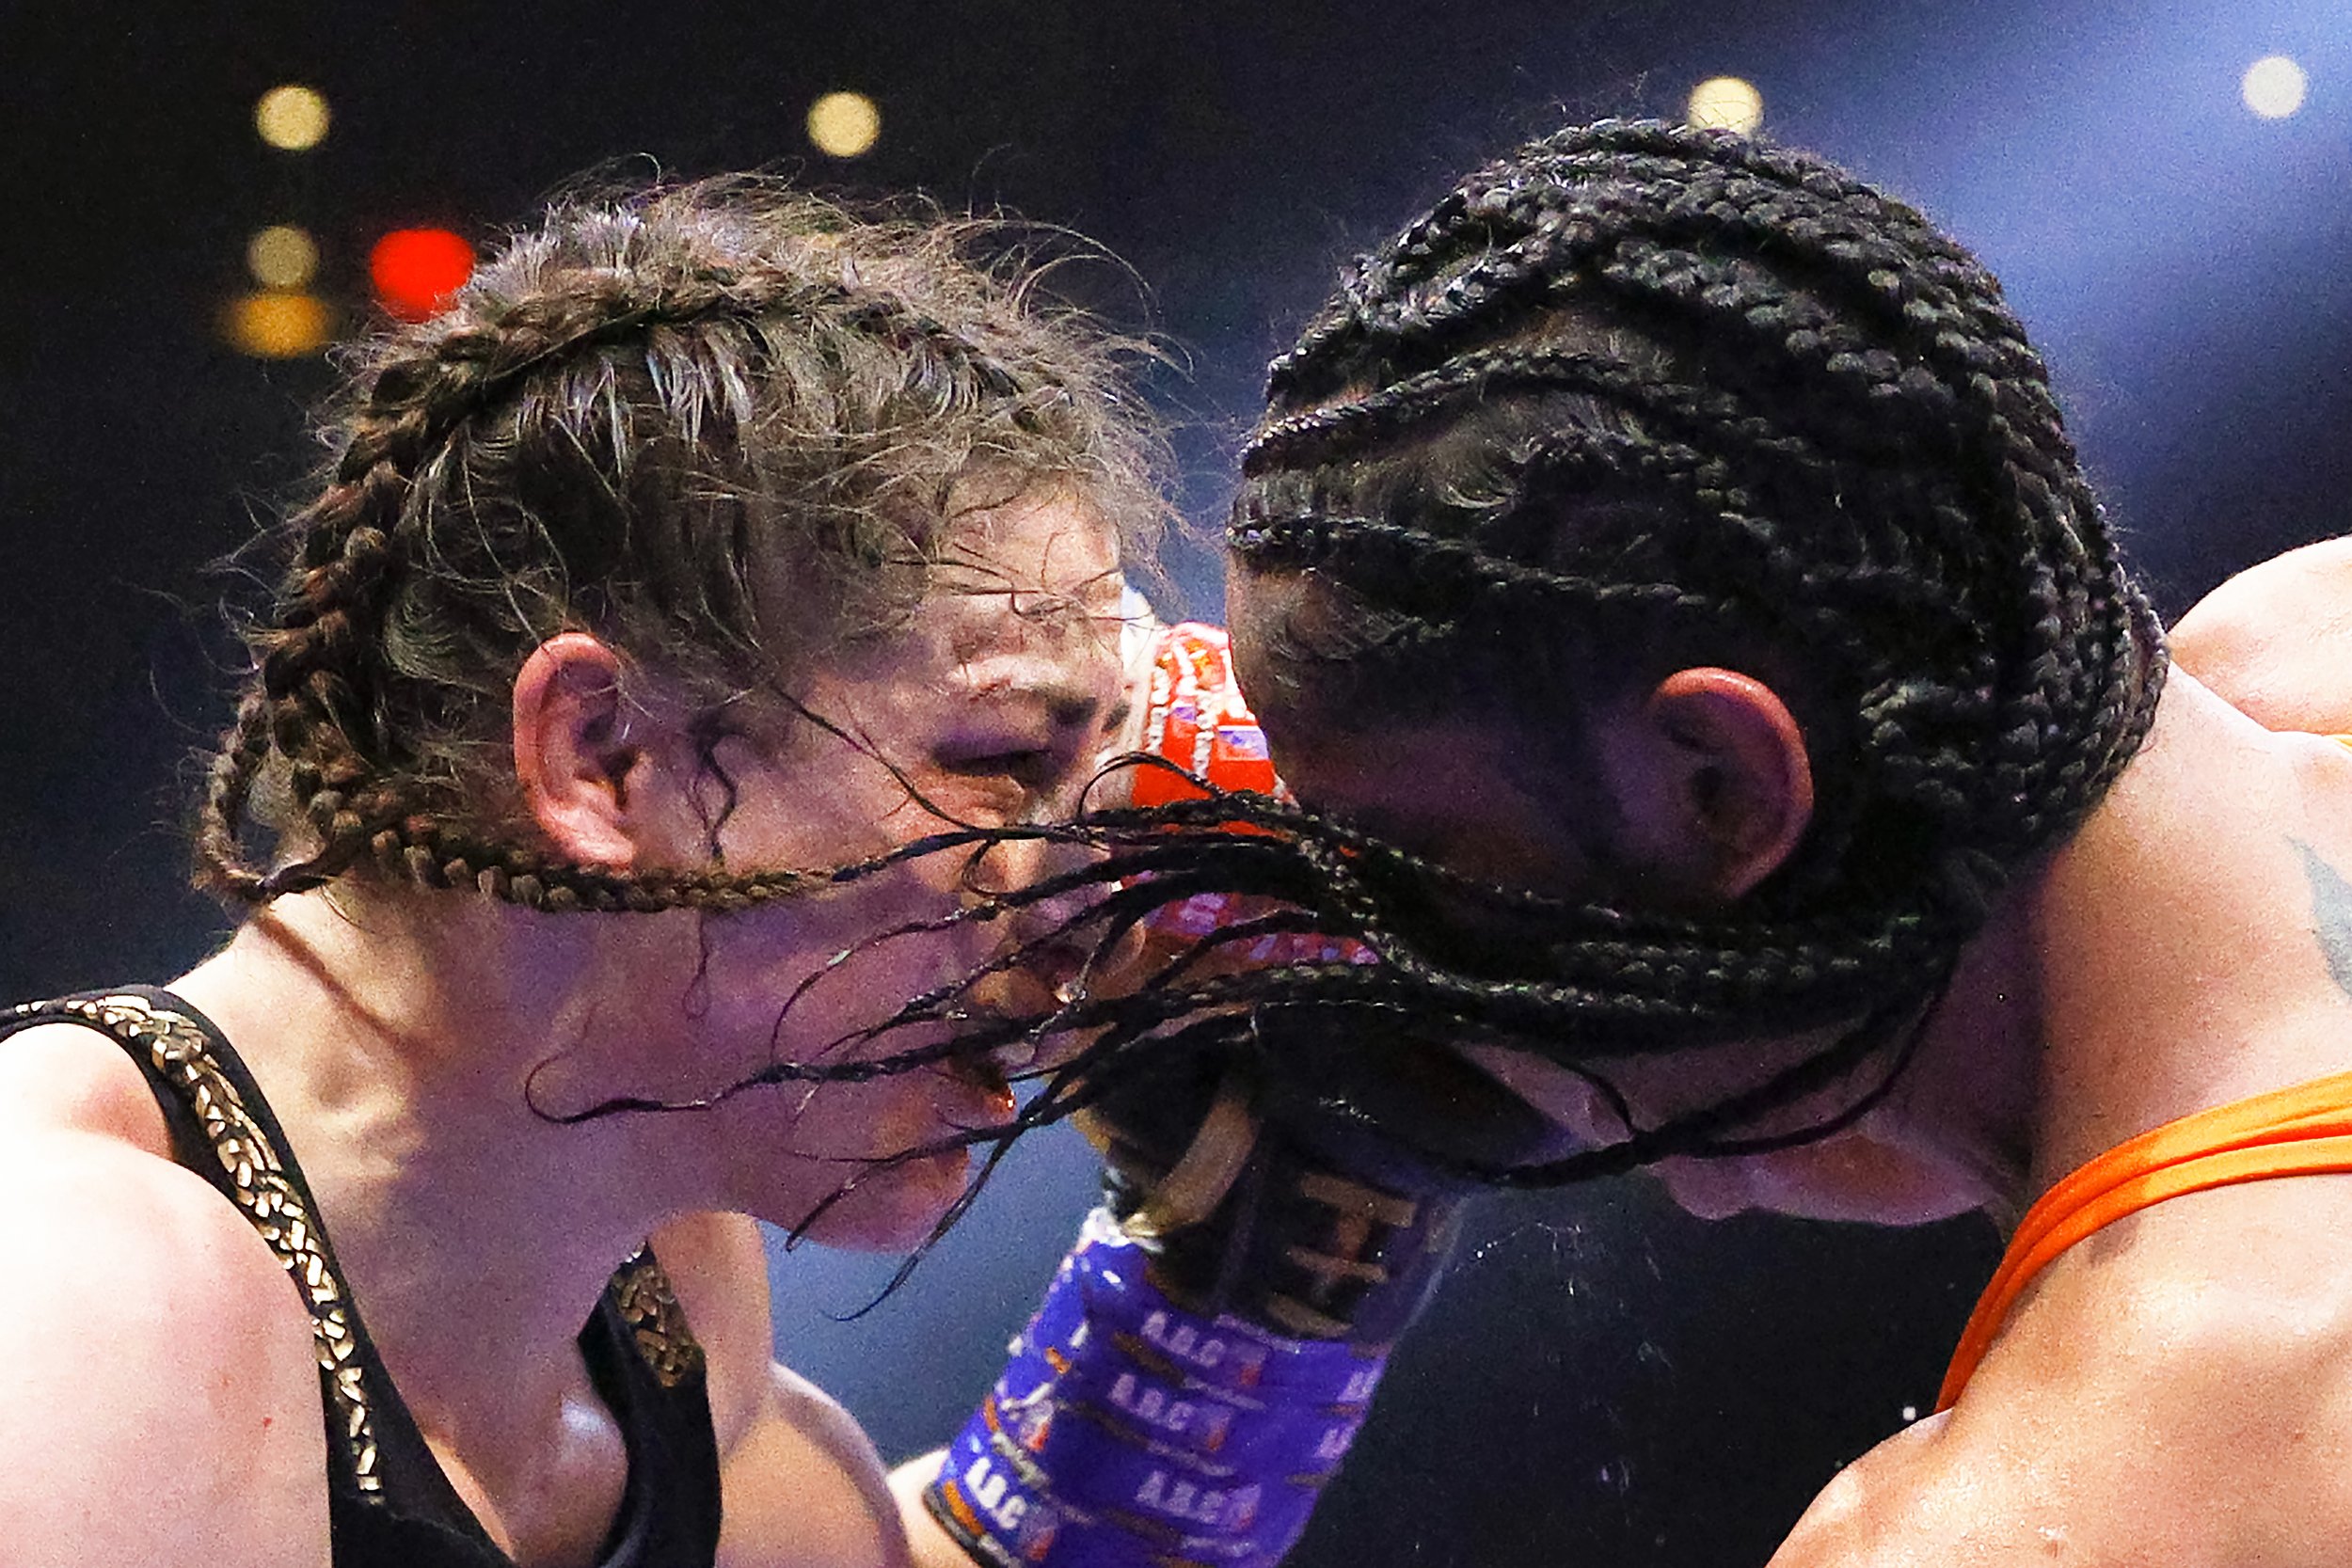  Katie Taylor of Ireland (L) trades punches with Amanda Serrano of Puerto Rico (R) for the World Lightweight Title fight at Madison Square Garden on April 30, 2022 in New York, New York. This bout marks the first women’s boxing fight to headline Madi